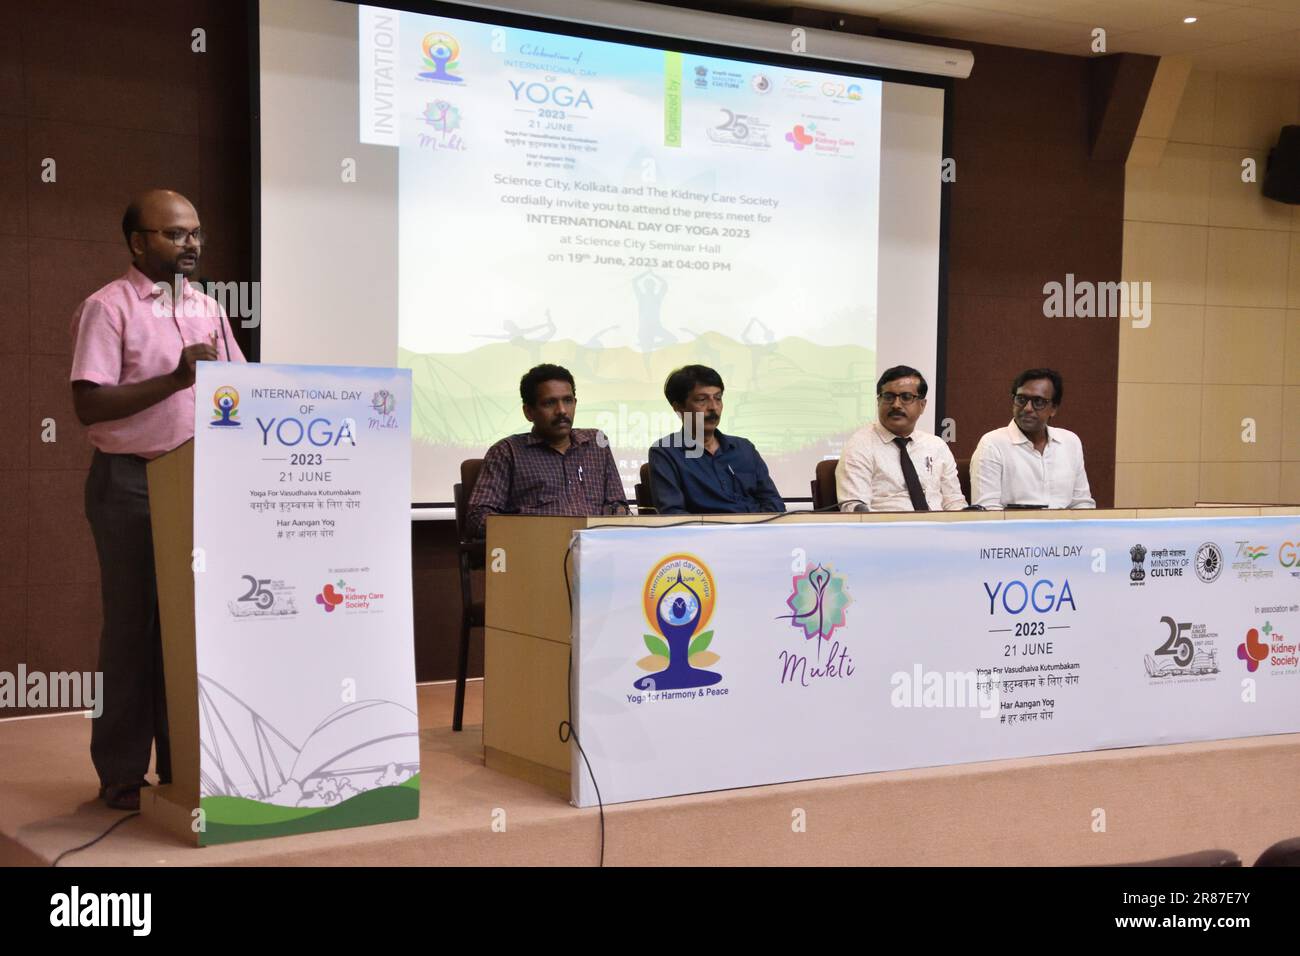 Kolkata, India. 19th June, 2023. Press meet for upcoming event, celebration of the International Day of Yoga with about 500 underprivileged children and school children in the Science City premises on June 21, 2023. The event will be a one-of-a-kind initiative at the heart of the city as several dignitaries and sports personalities. It will be organised jointly by Science City, Kolkata and The Kidney Care Society. (Photo by Biswarup Ganguly/Pacific Press) Credit: Pacific Press Media Production Corp./Alamy Live News Stock Photo